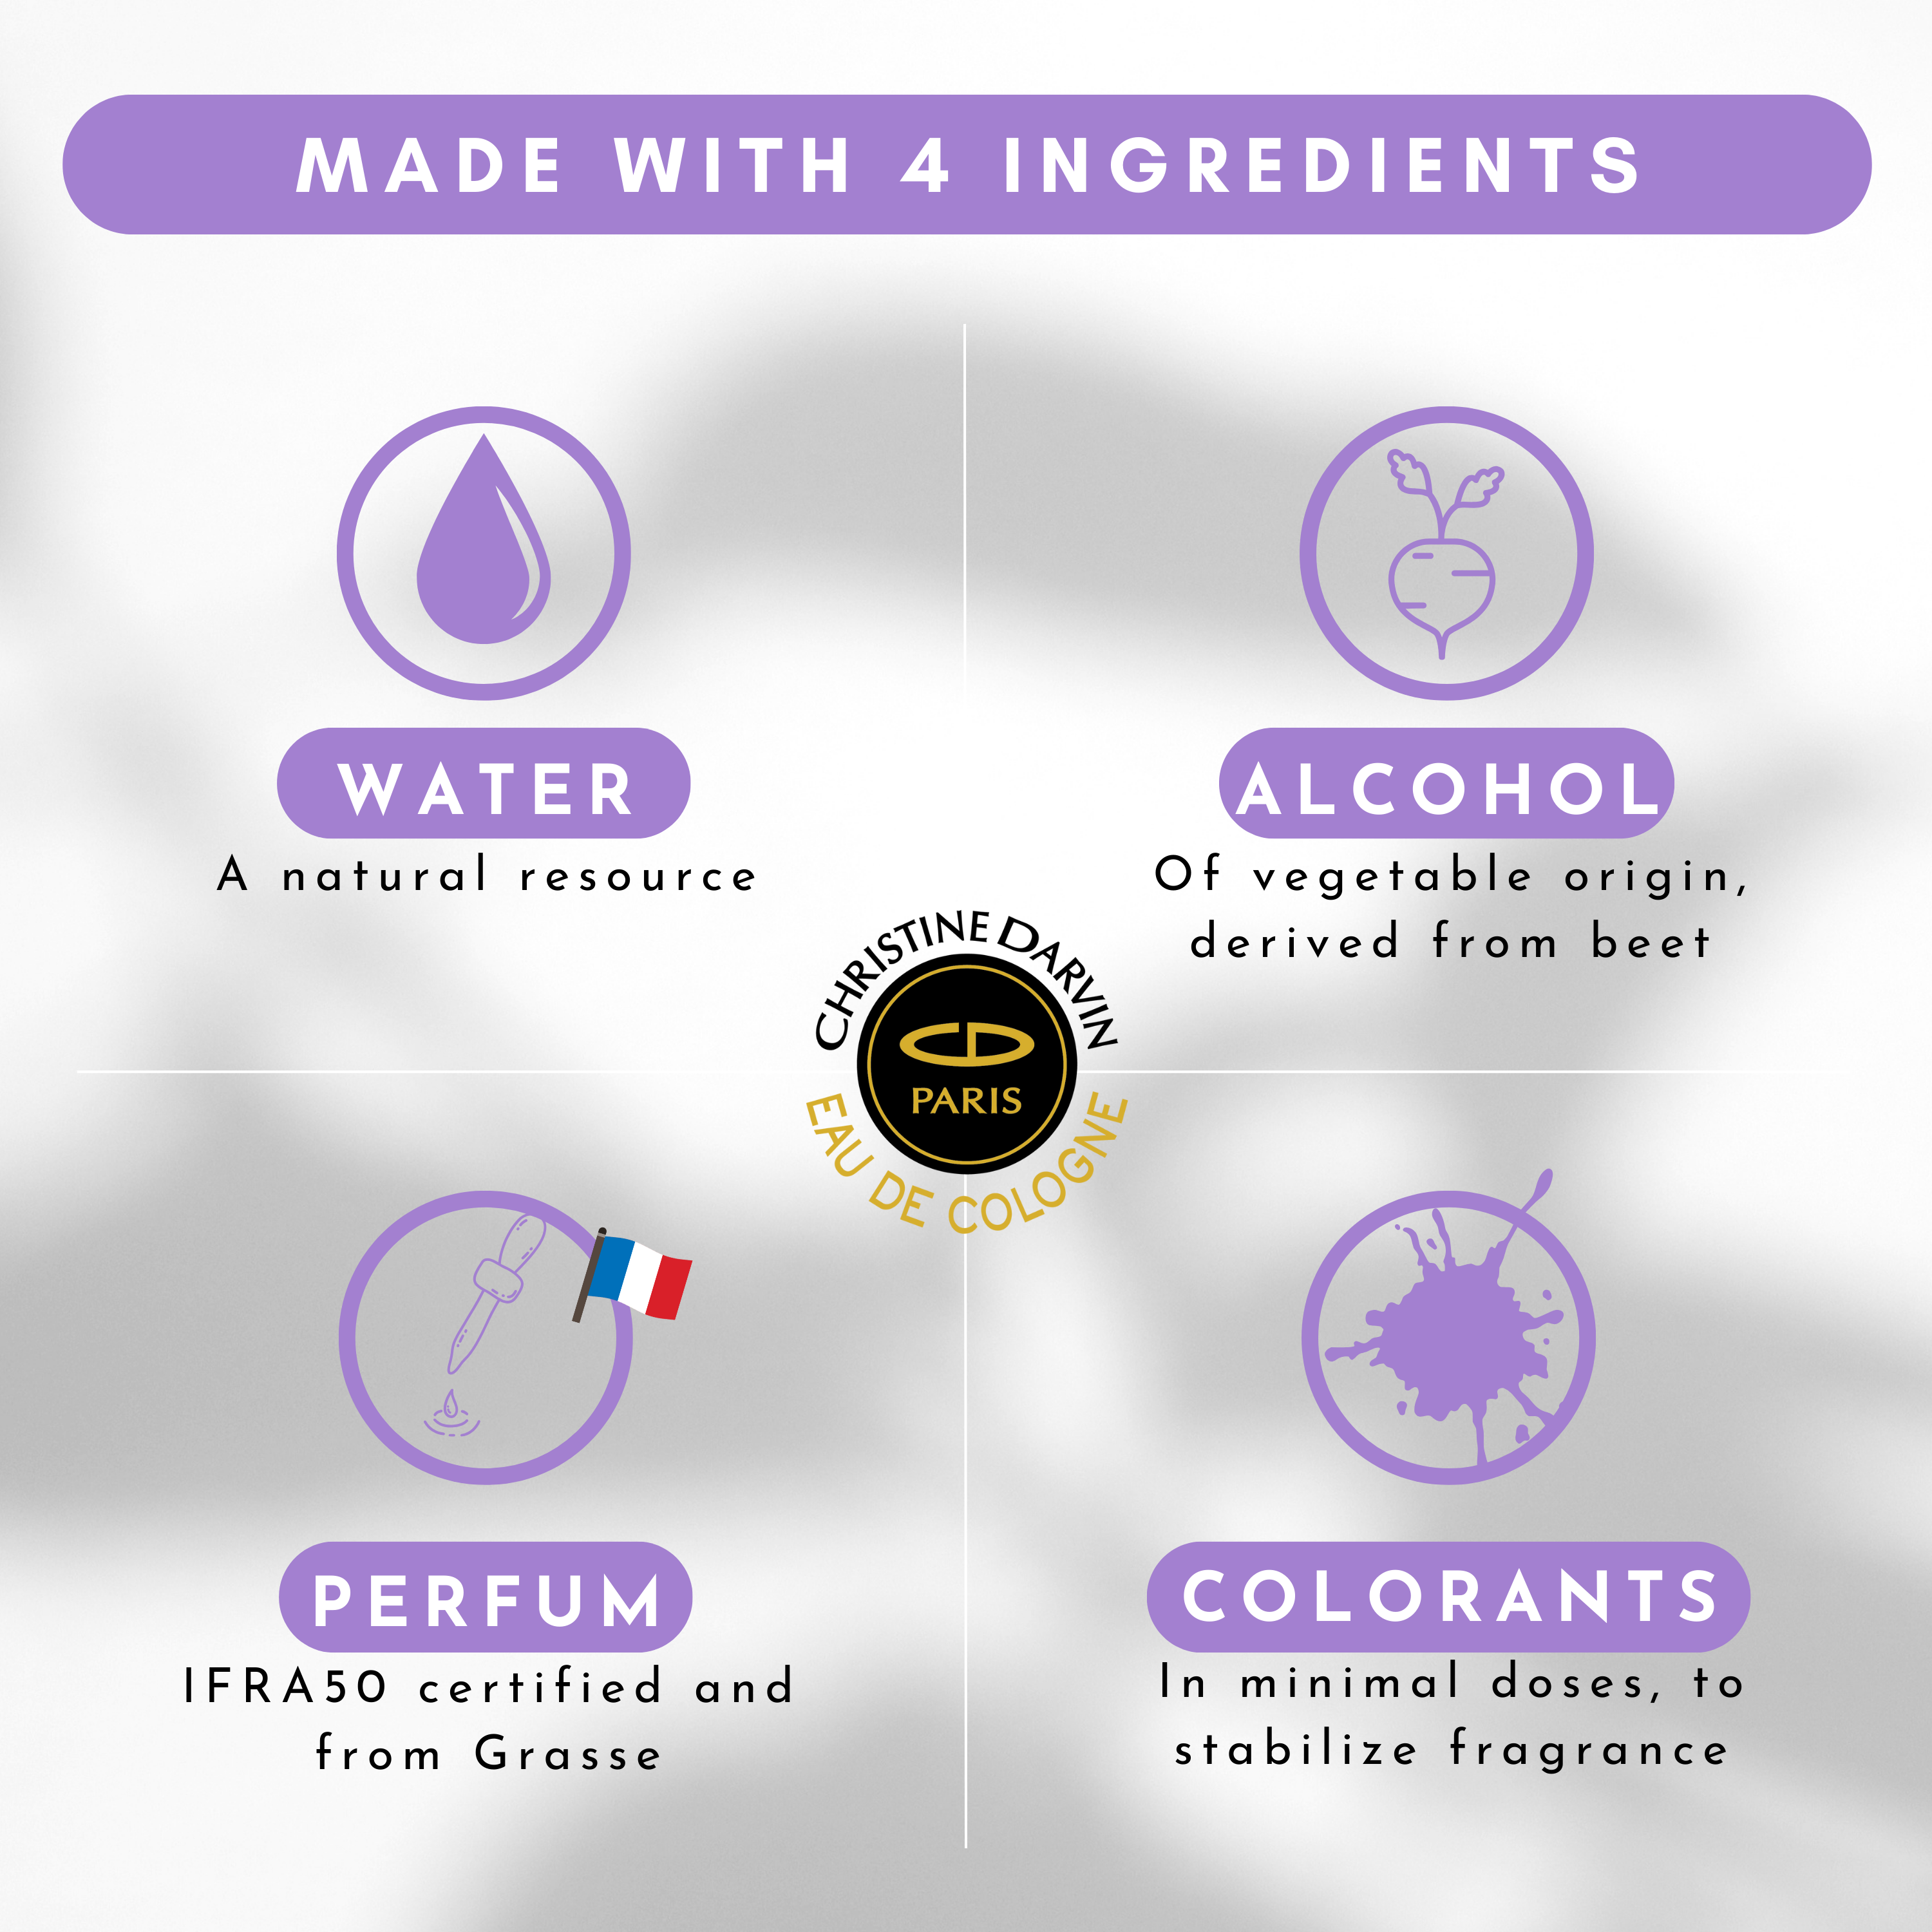 Ingredients eau de Cologne fragrance Lilac blue 97% natural origin and 100% French